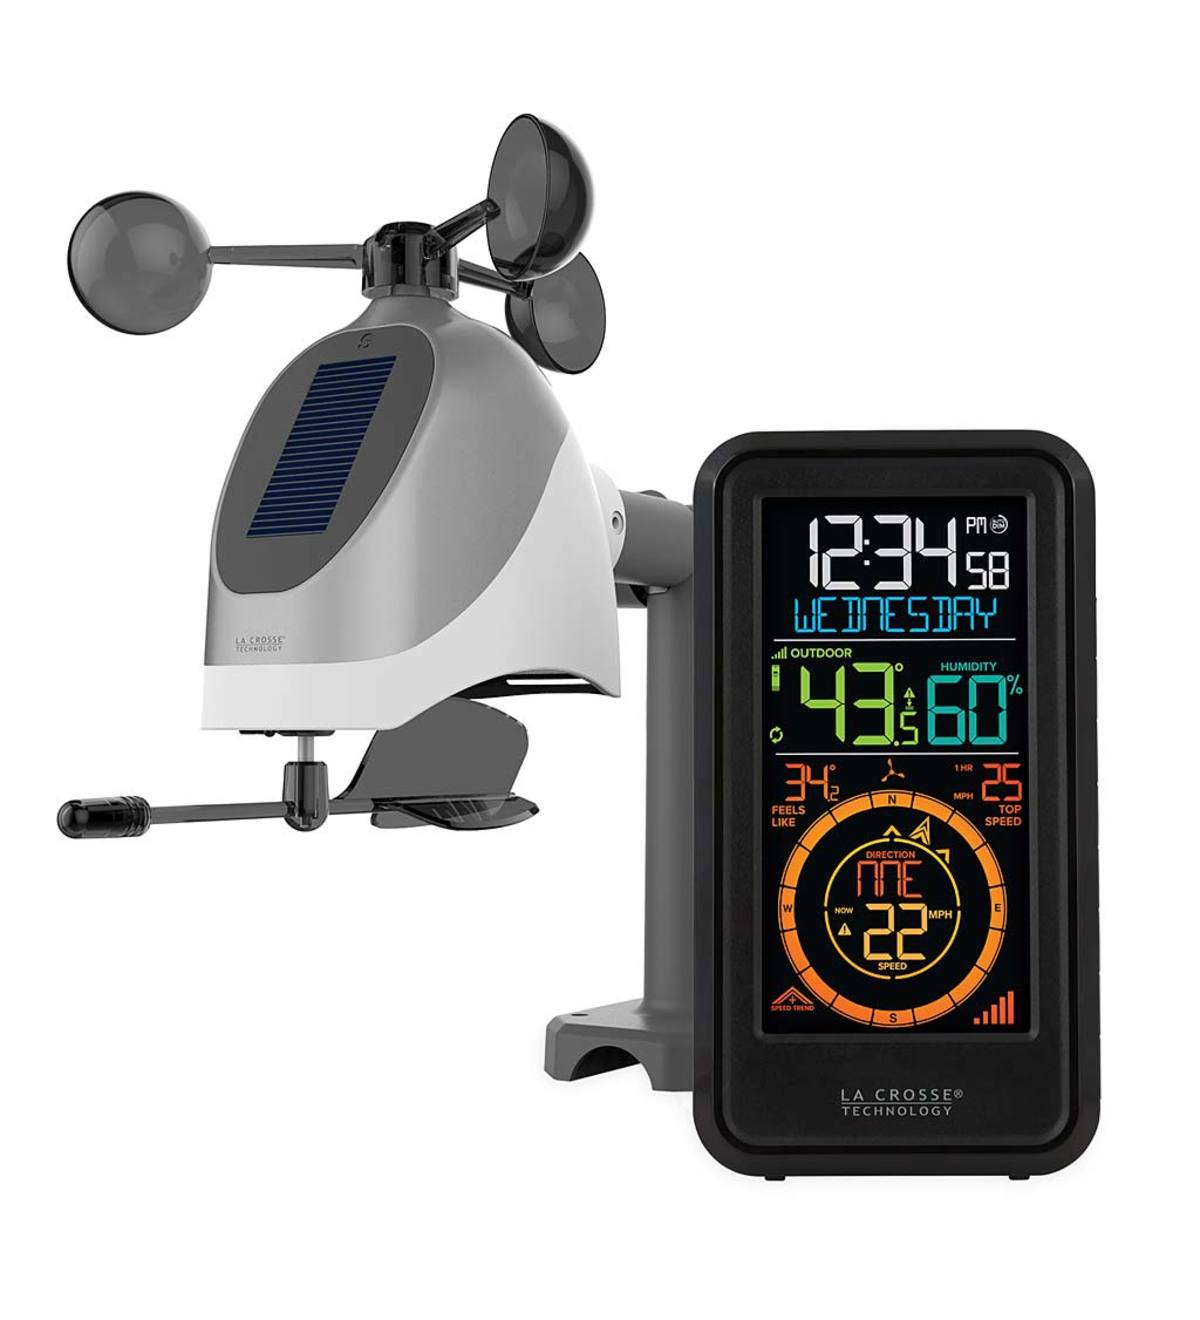 Handheld Weather Station with 3-in-1 Remote Sensor | Shop All Weather